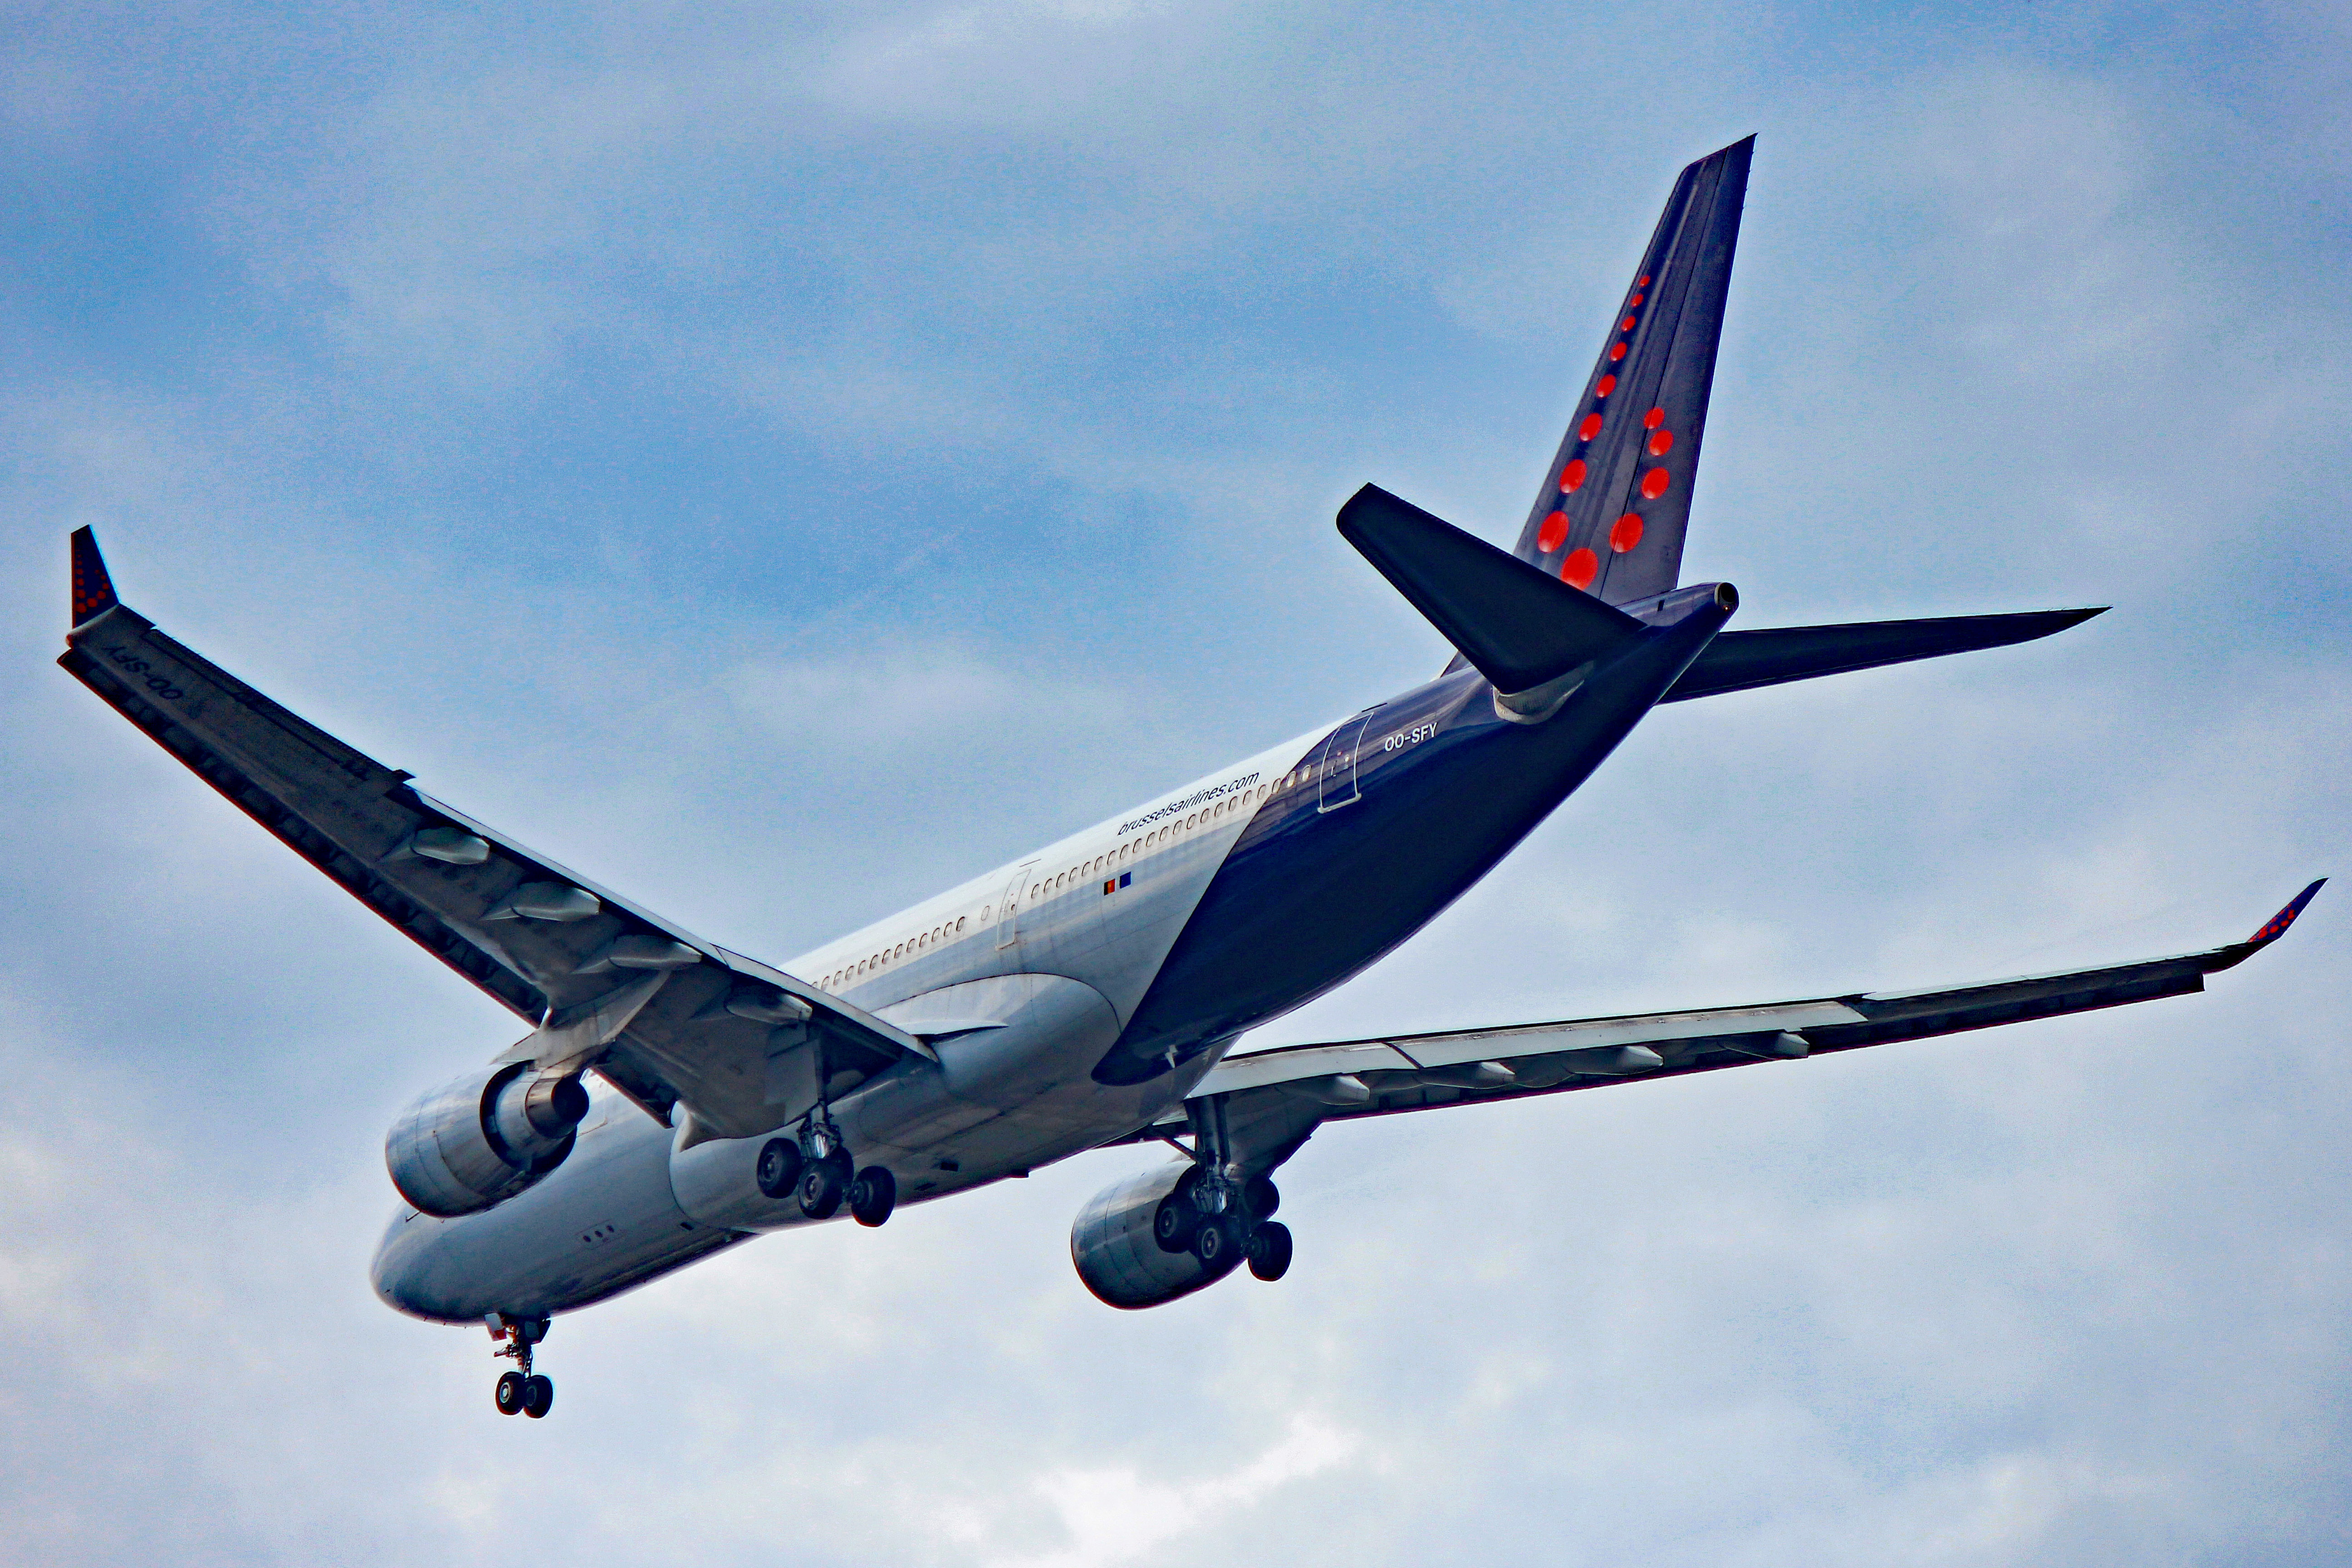 oo-sfy brussels airlines airbus a330-200 toronto yyz